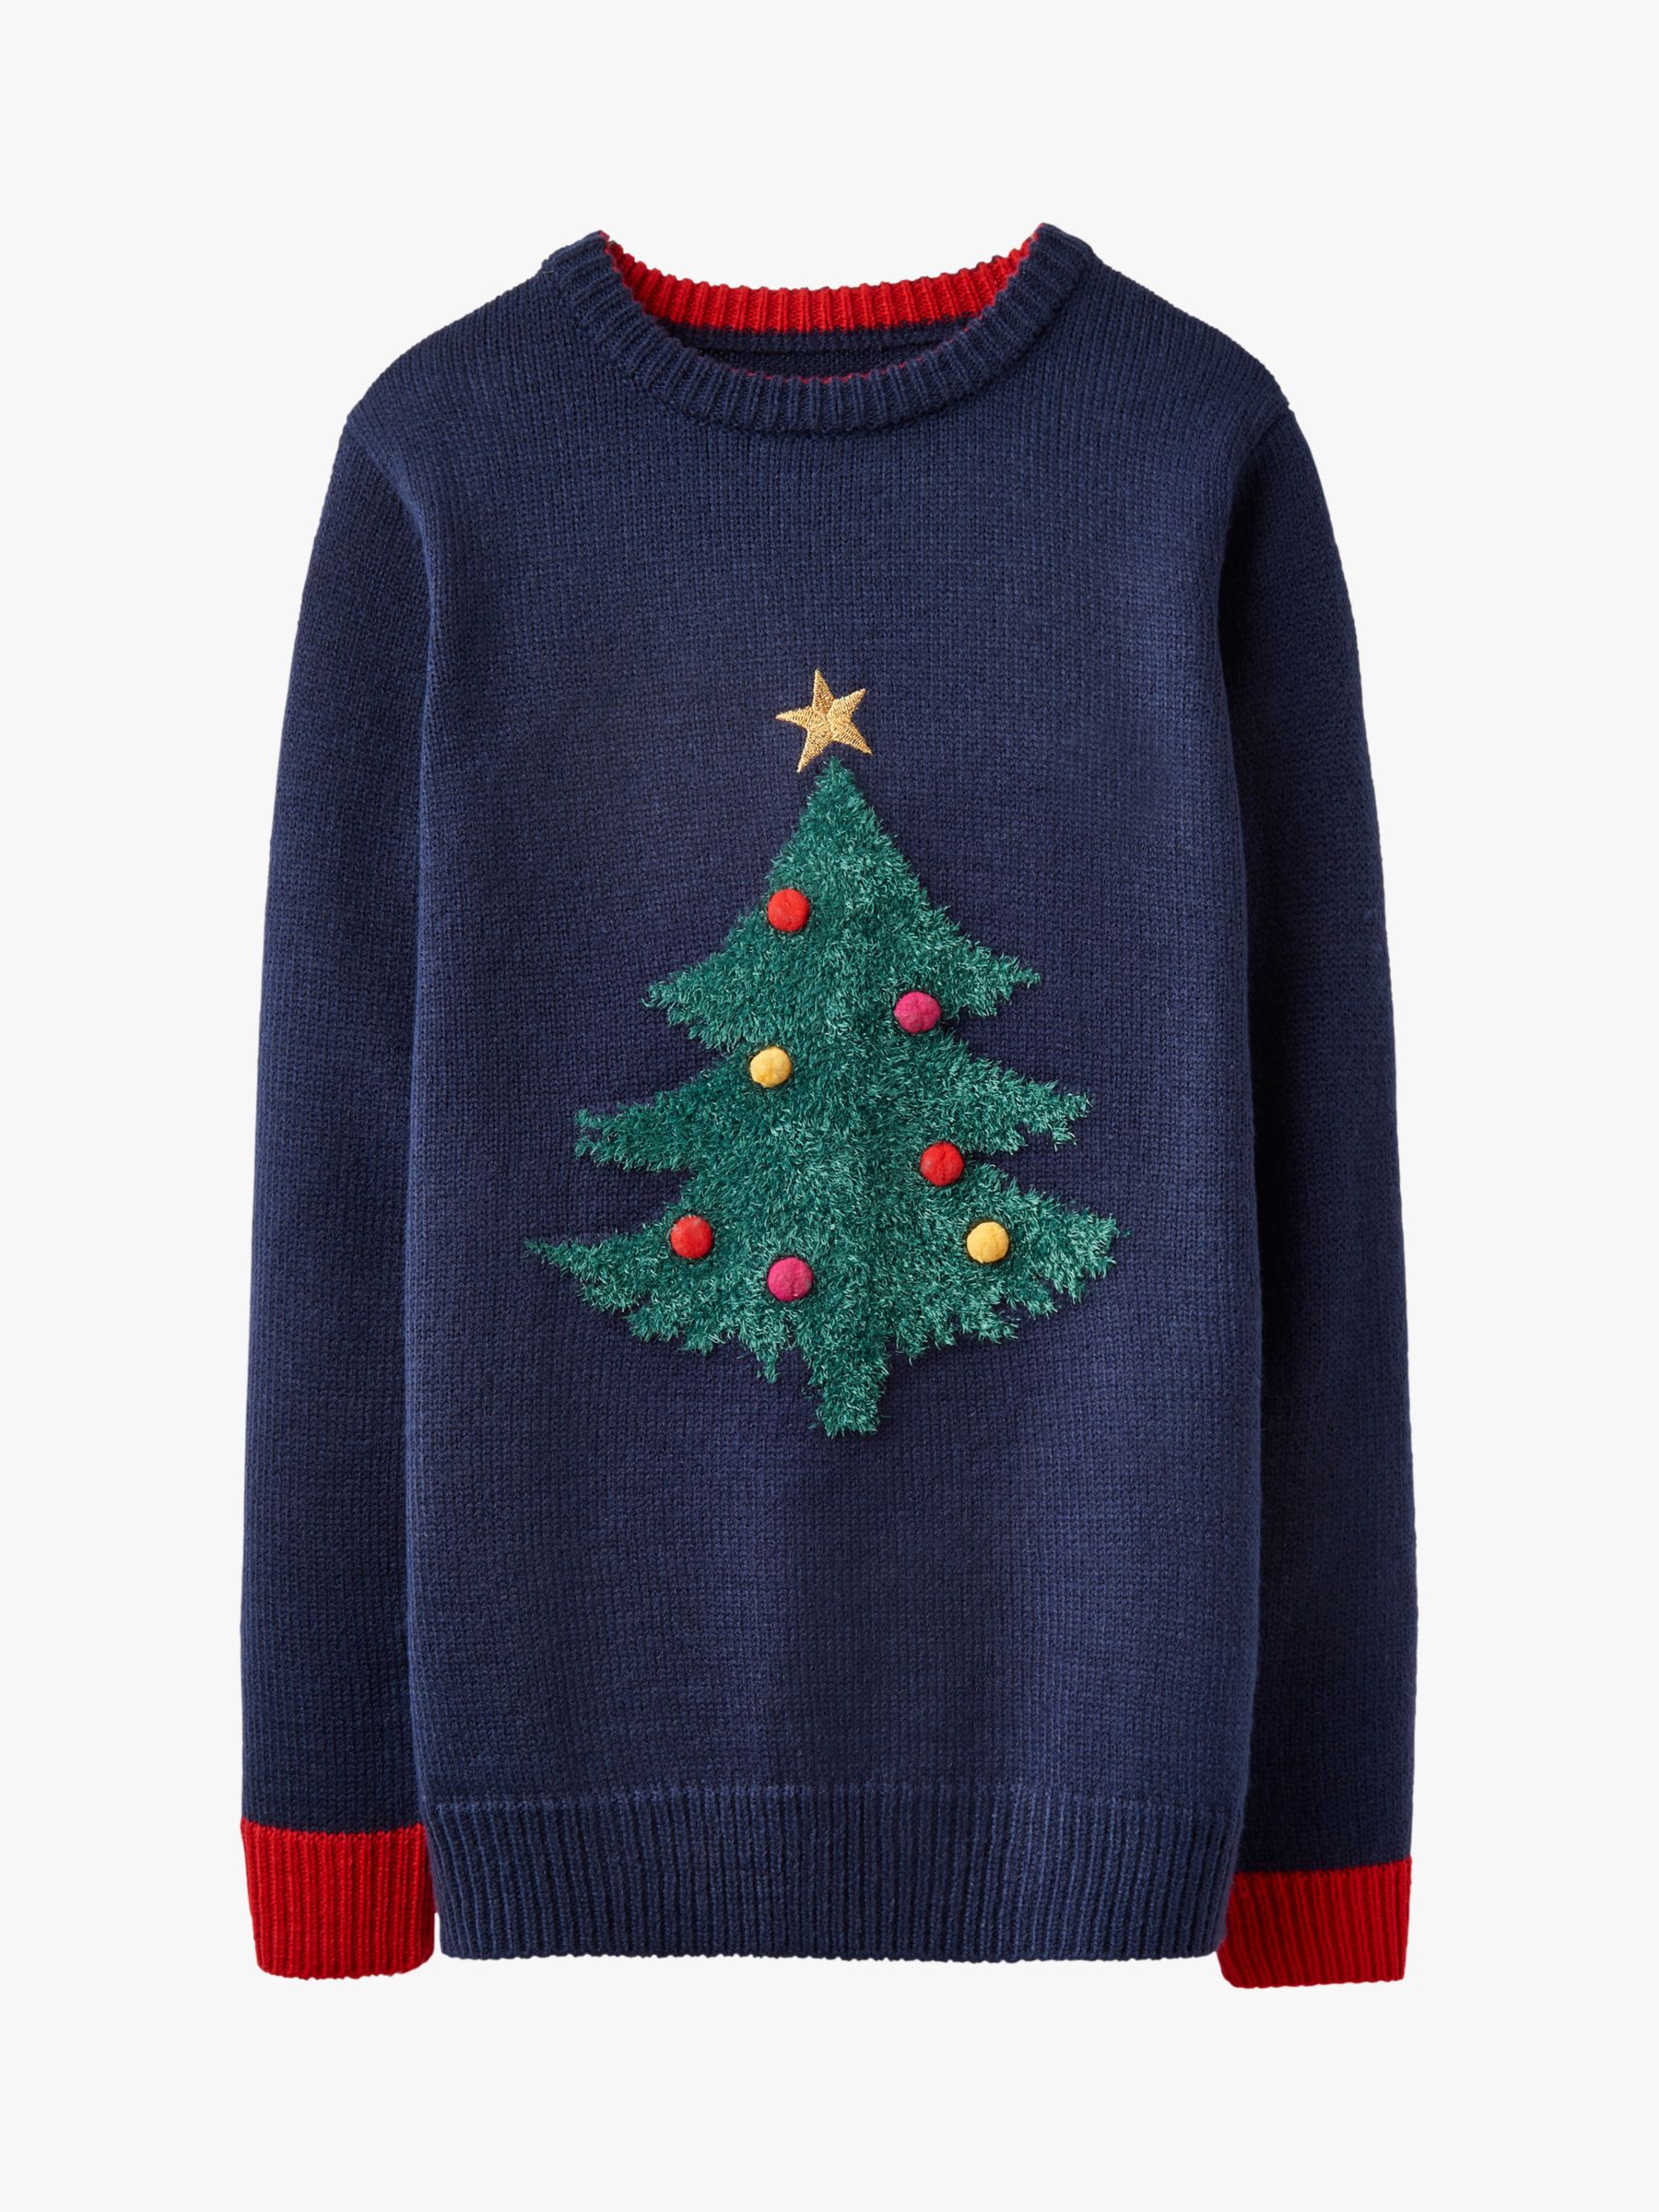 Little Joule Children's Wallace and Gromit Christmas Jumper, Navy at ...